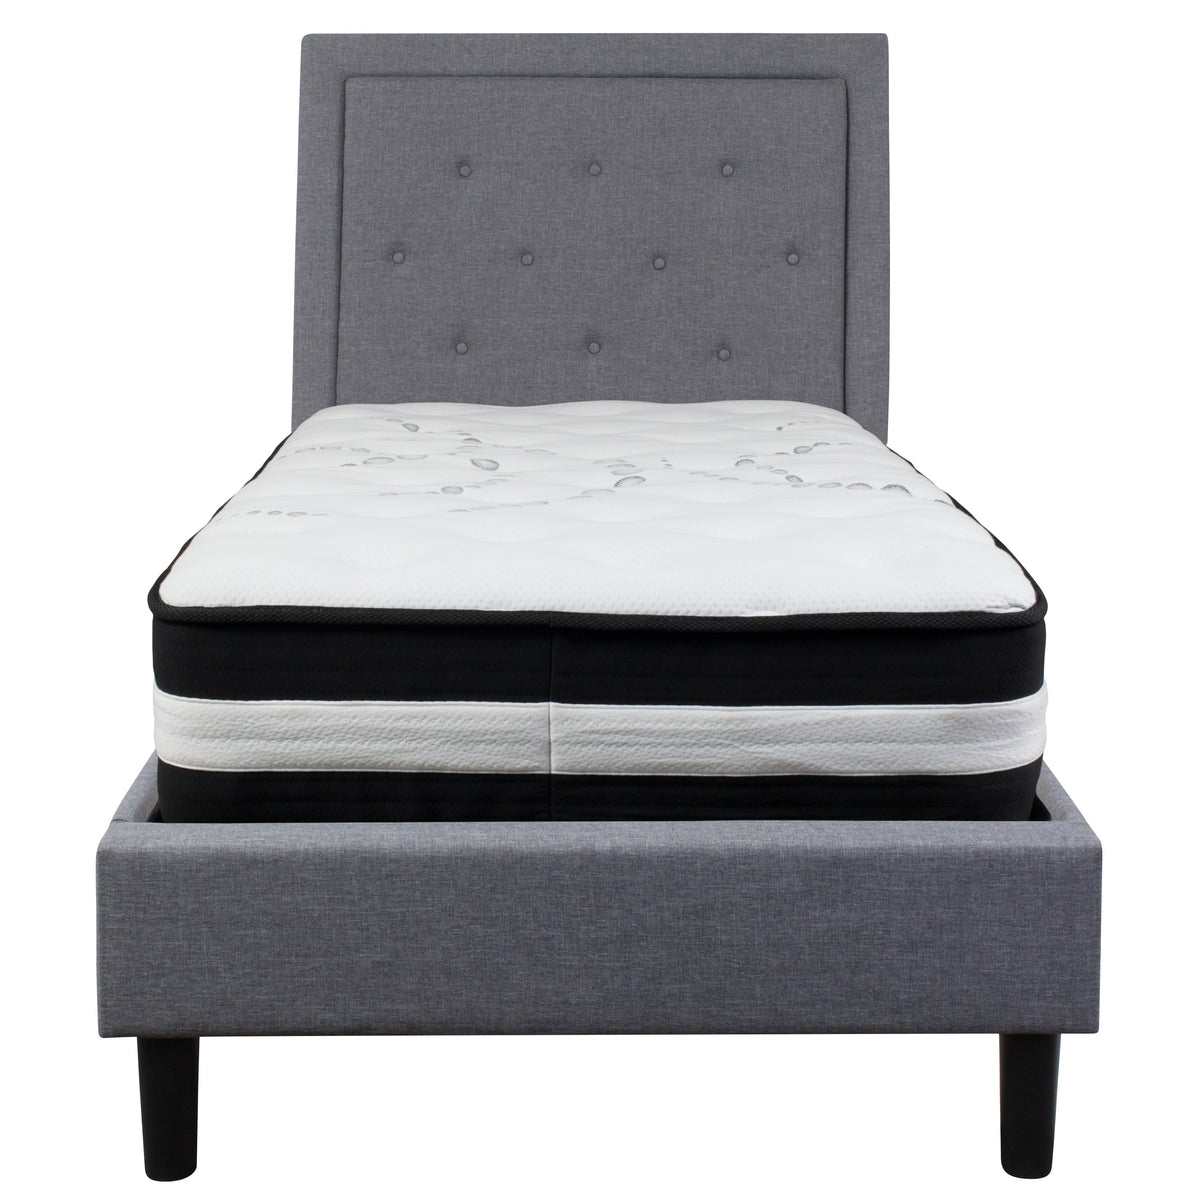 Light Gray,Twin |#| Twin Size Panel Tufted Lt. Gray Fabric Platform Bed with Pocket Spring Mattress